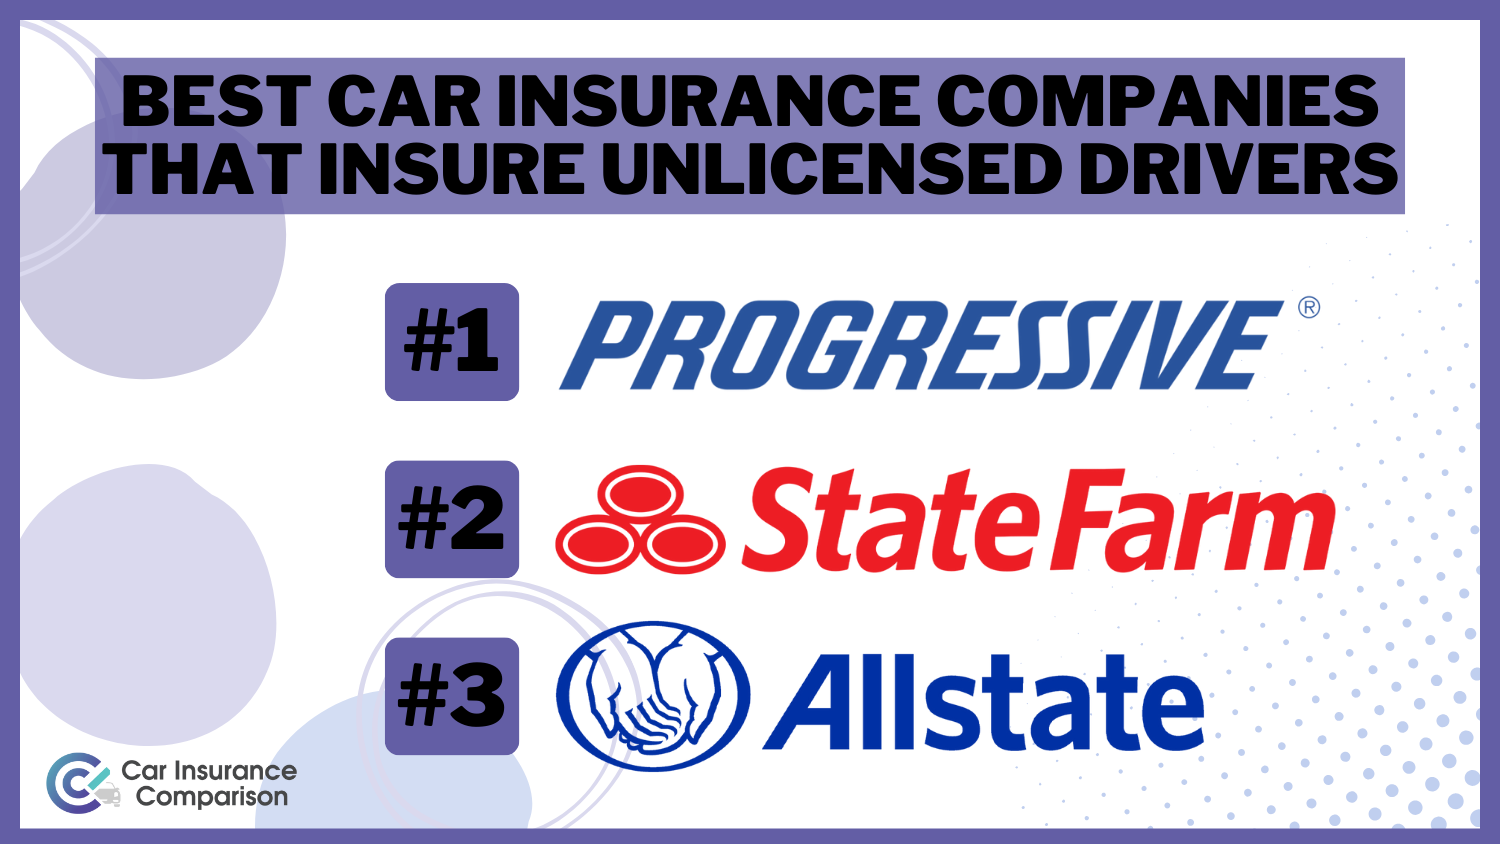 Progressive, State Farm, and Allstate: Best Car Insurance Companies That Insure Unlicensed Drivers